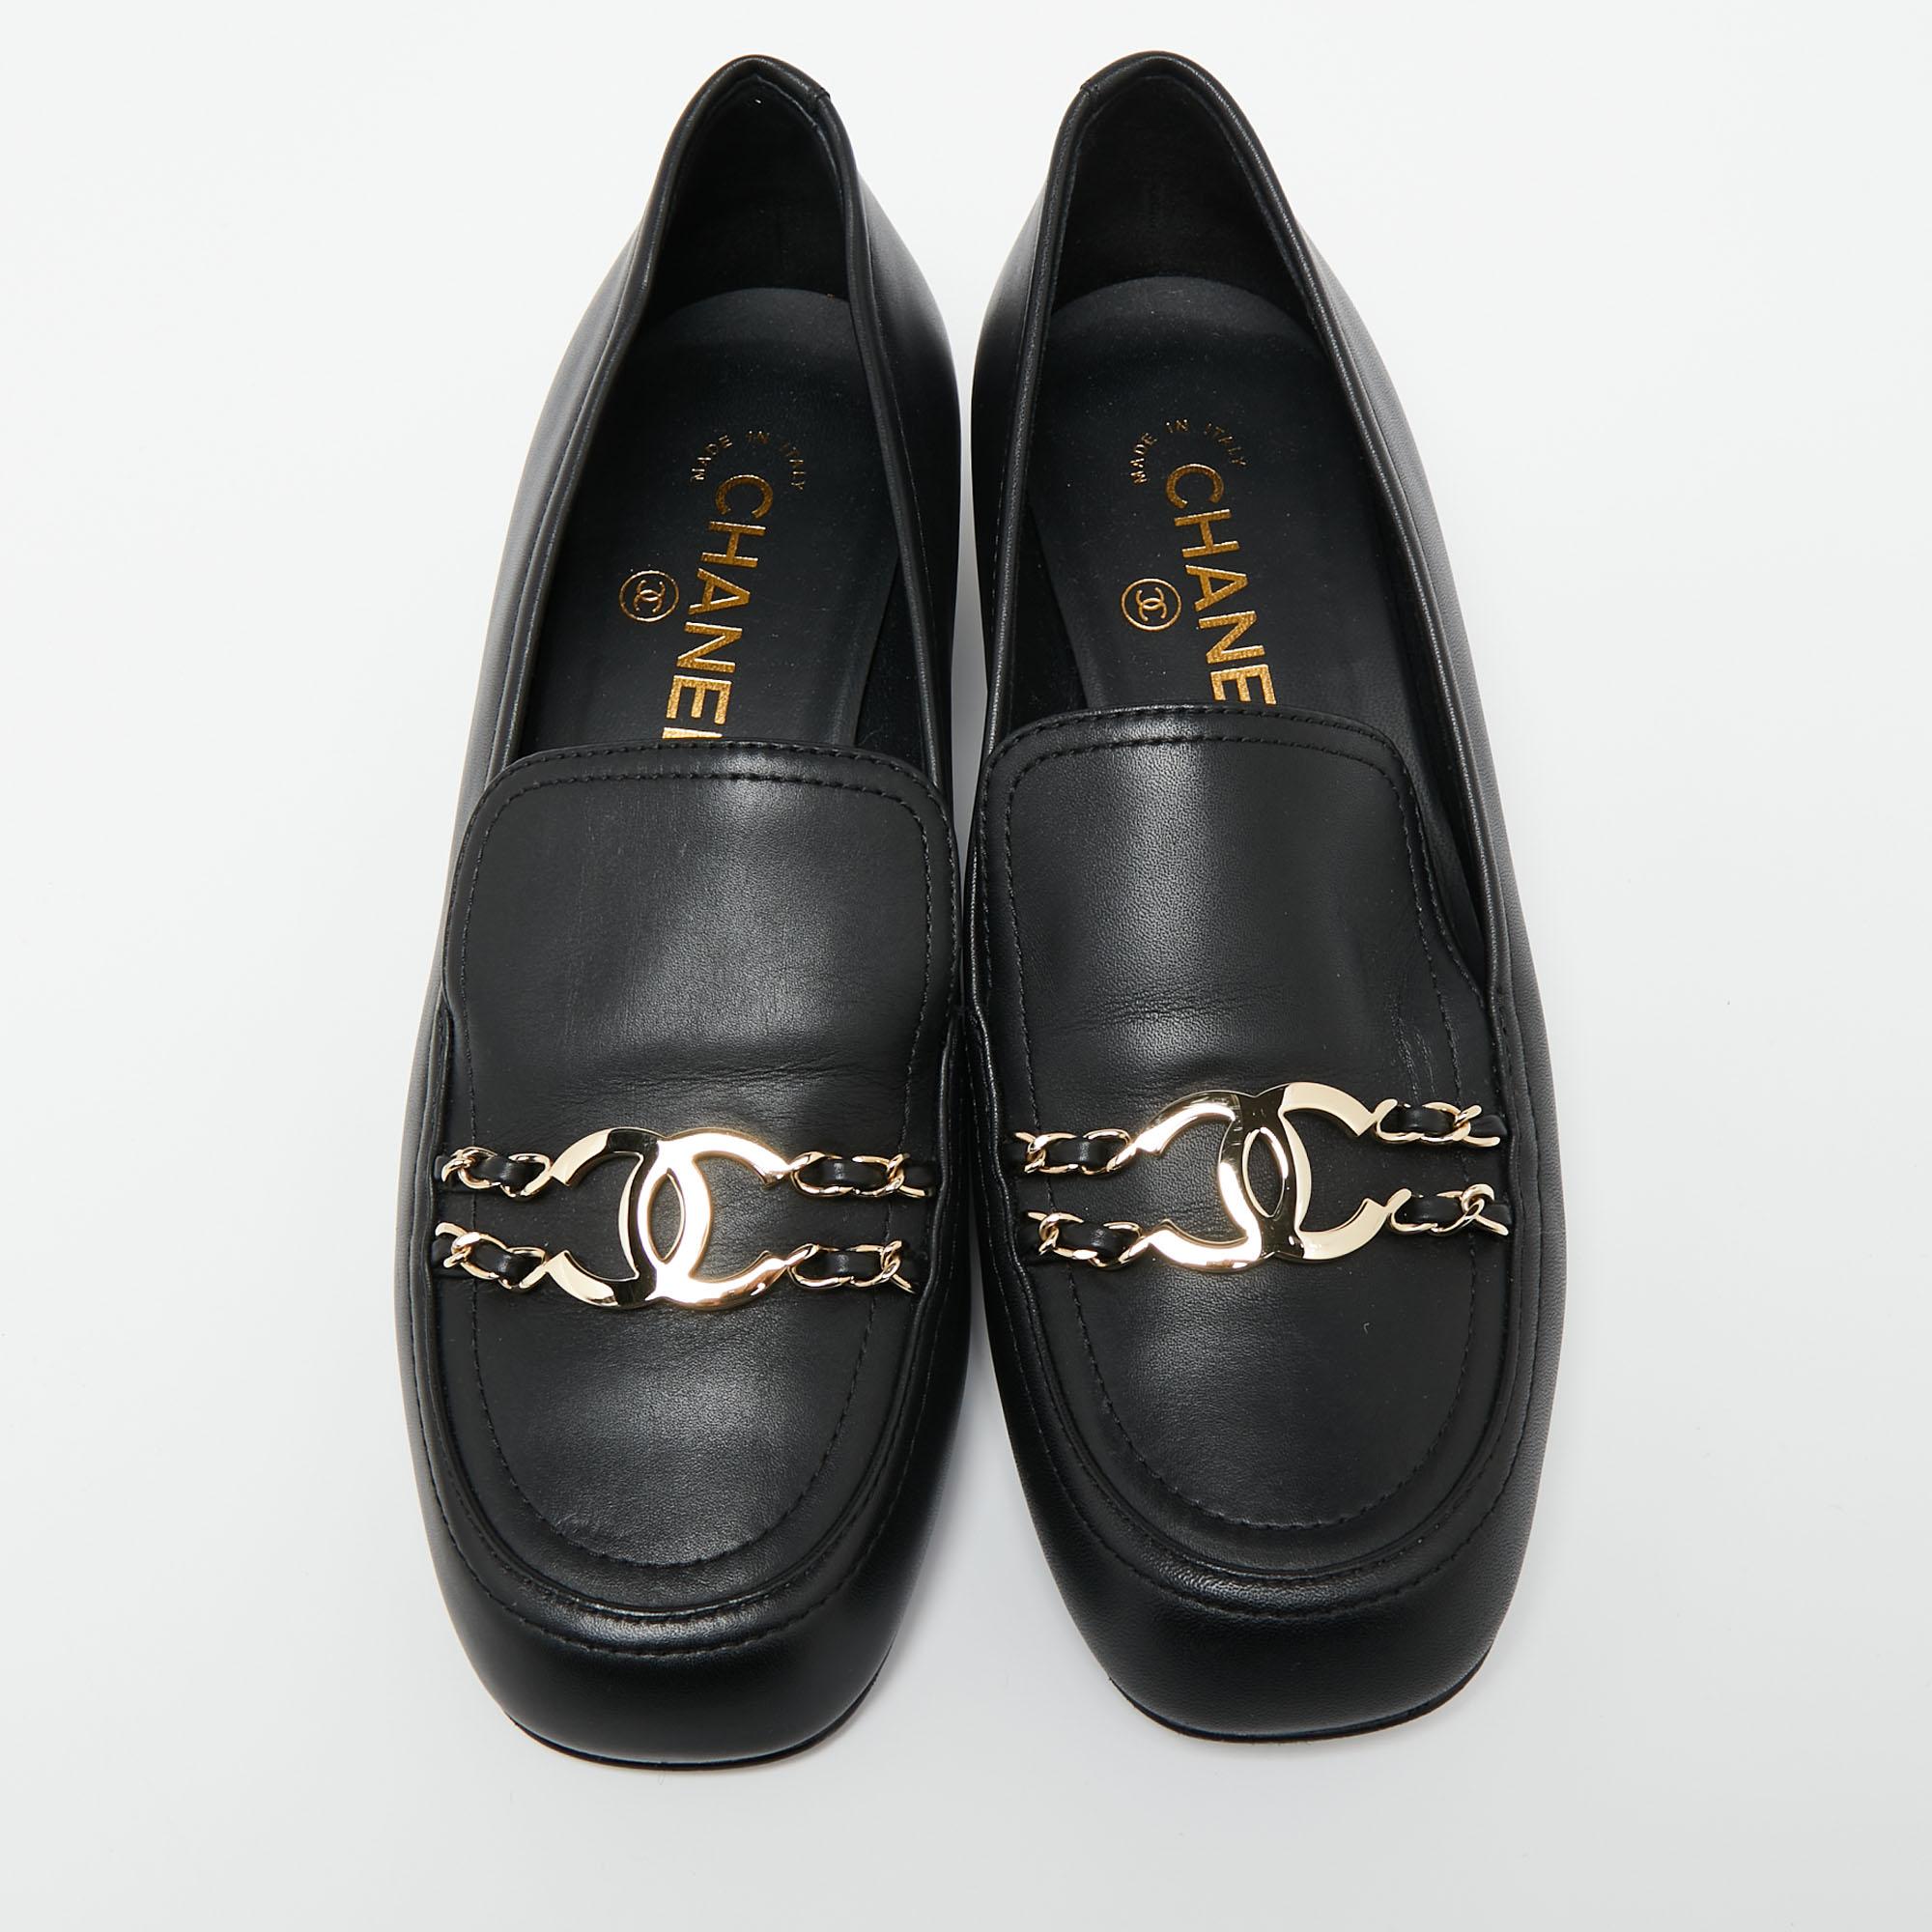 Chanel Black Leather CC Chain Link Slip On Loafers Size 39 3